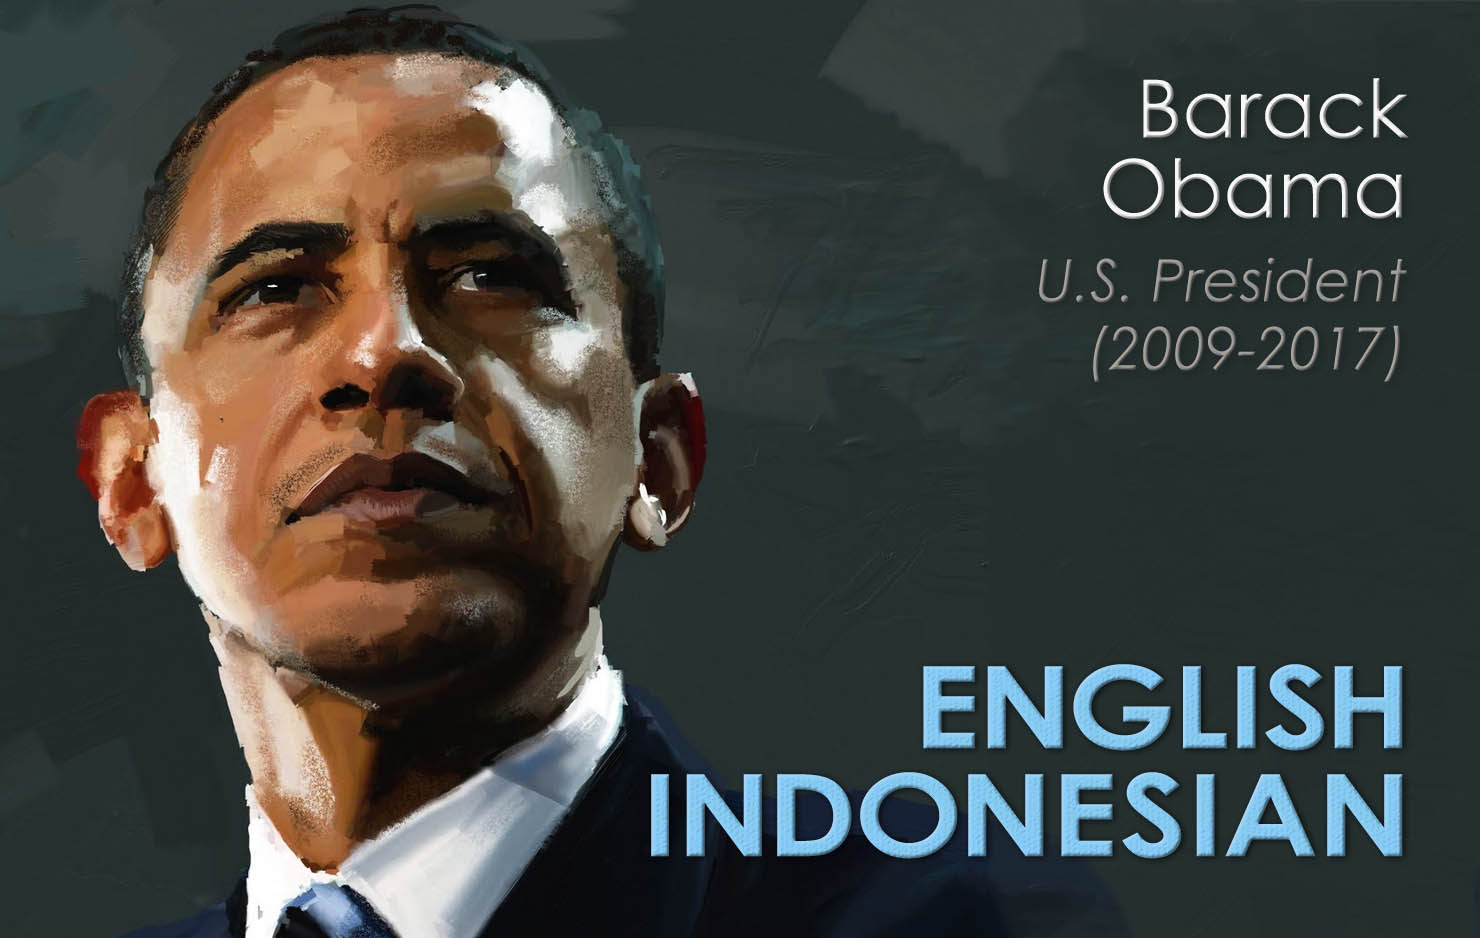 Barack Obama has a basic understanding of Indonesian from having lived in Indonesia as a child. He has demonstrated his facility with the language in both interviews and speeches—notably the 2011 address he gave to the University of Indonesia.